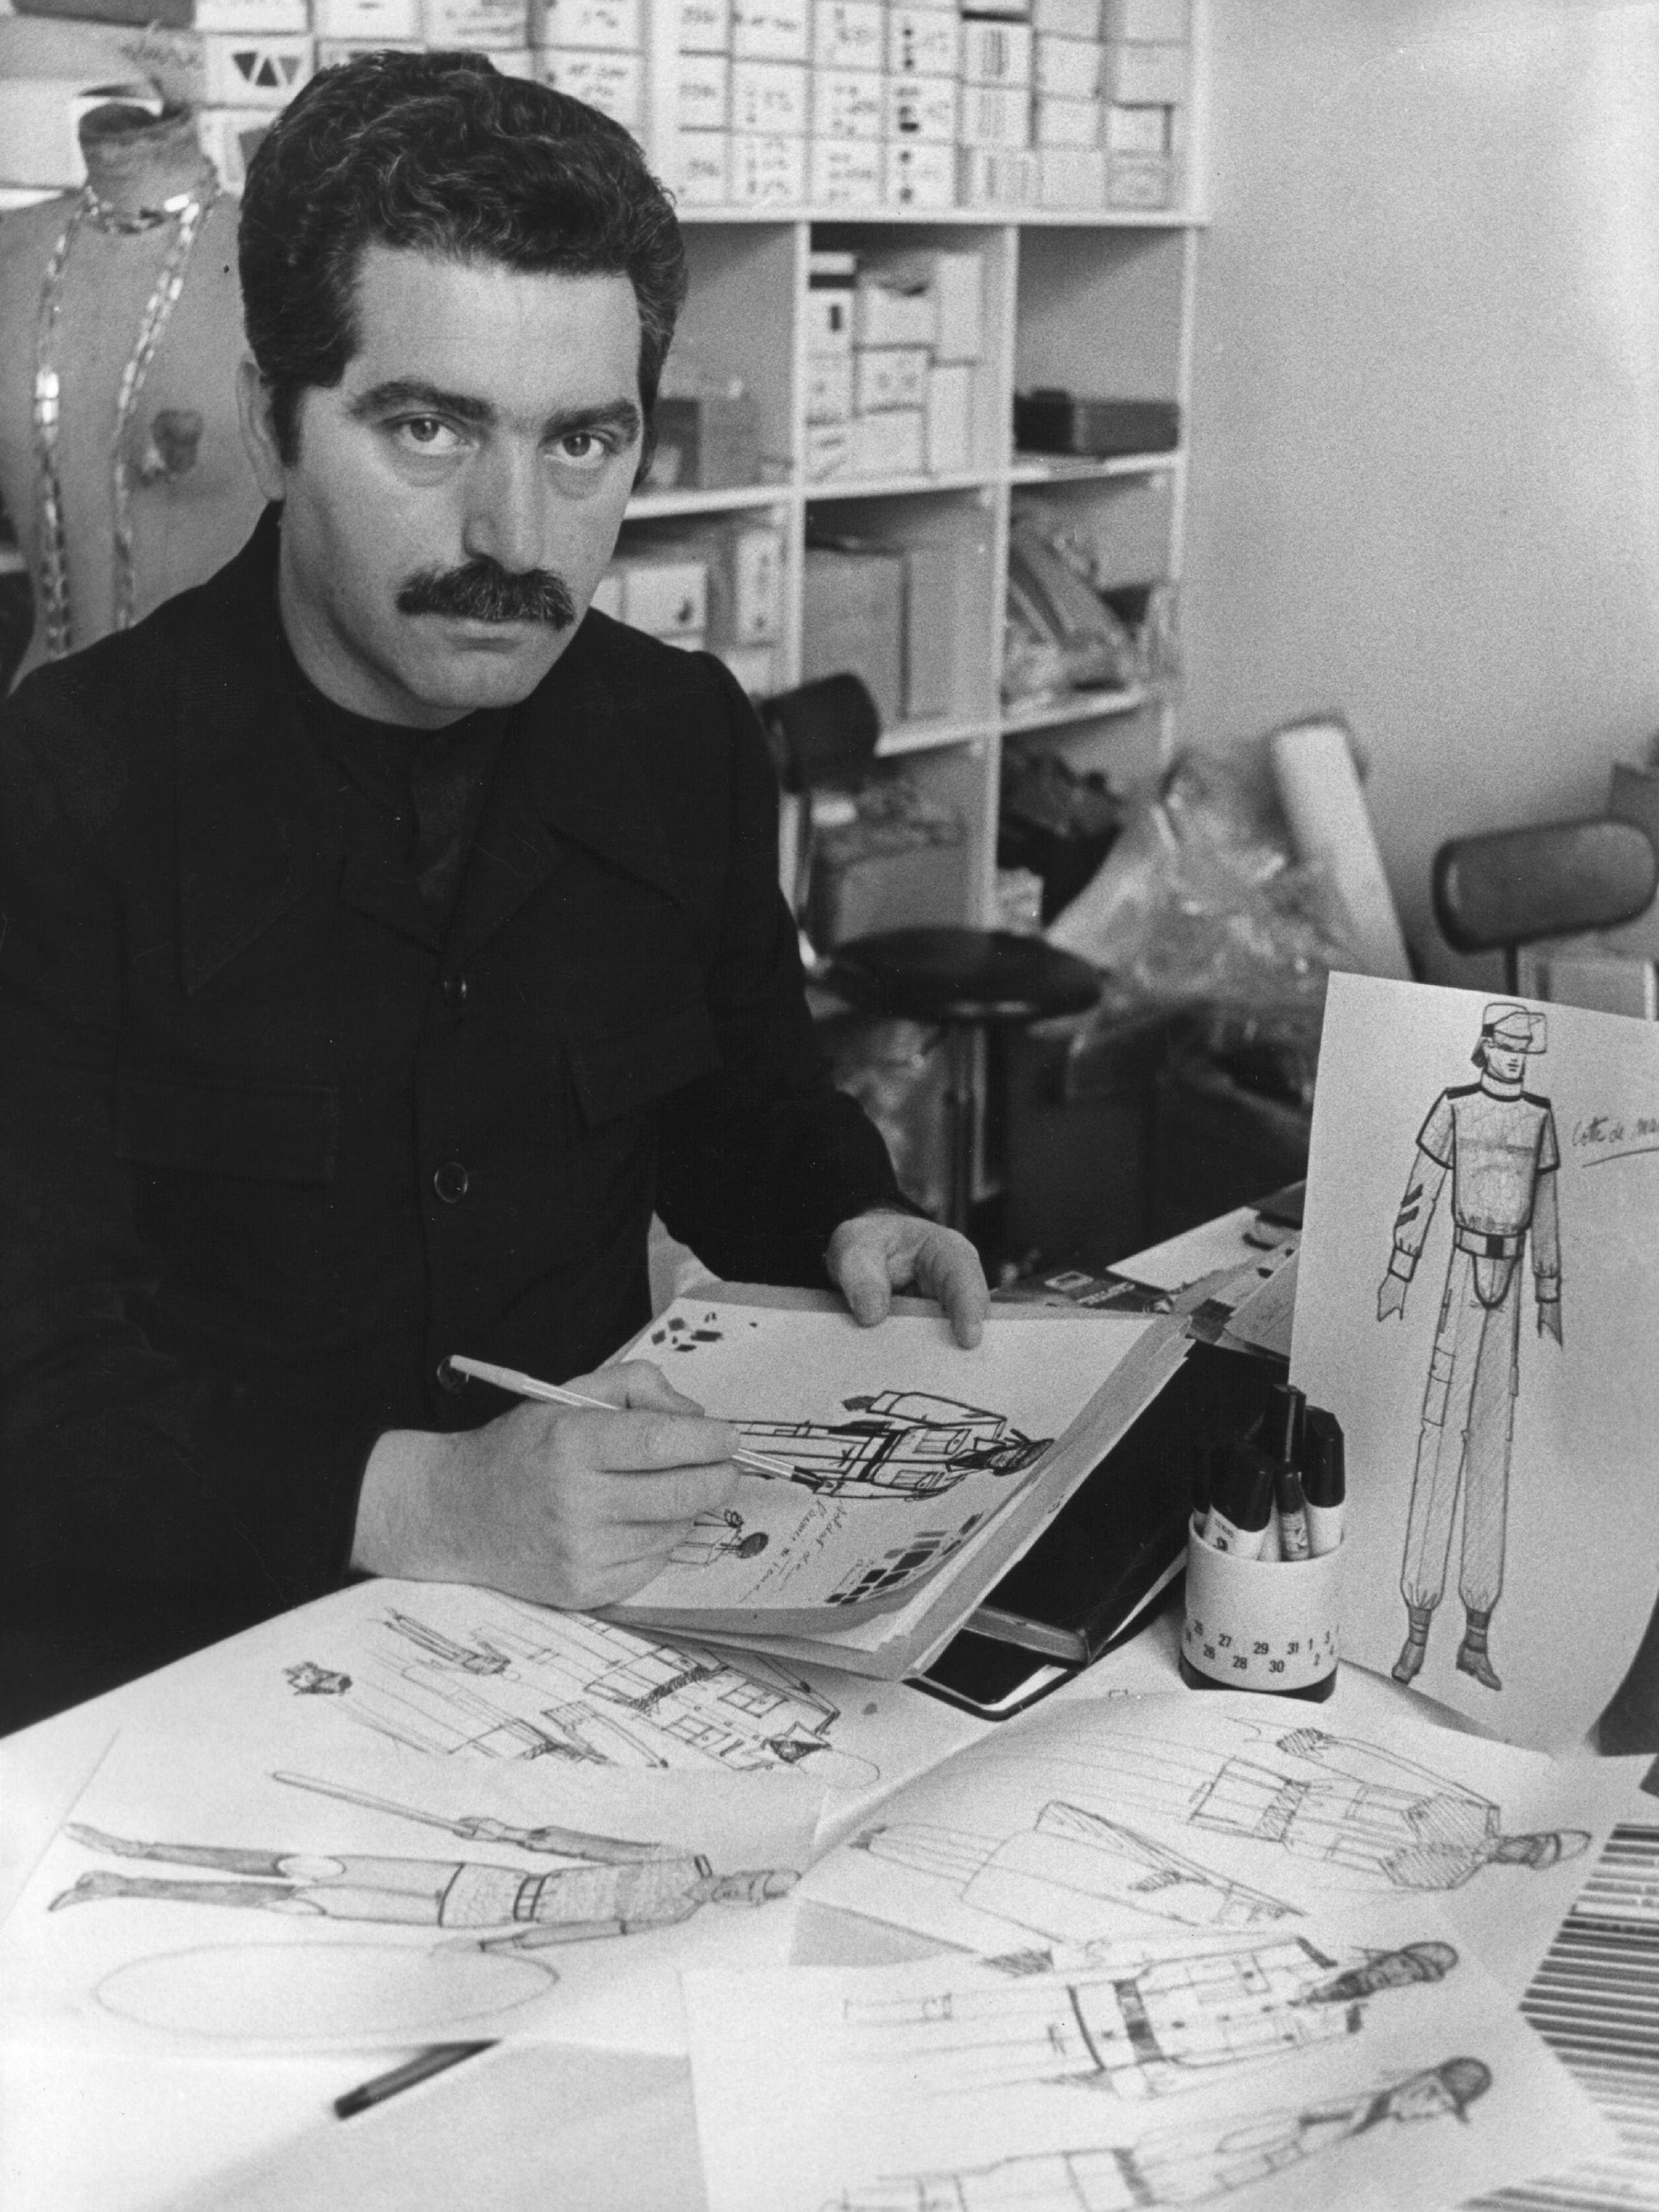 Designing uniforms for the French army in his Paris studio